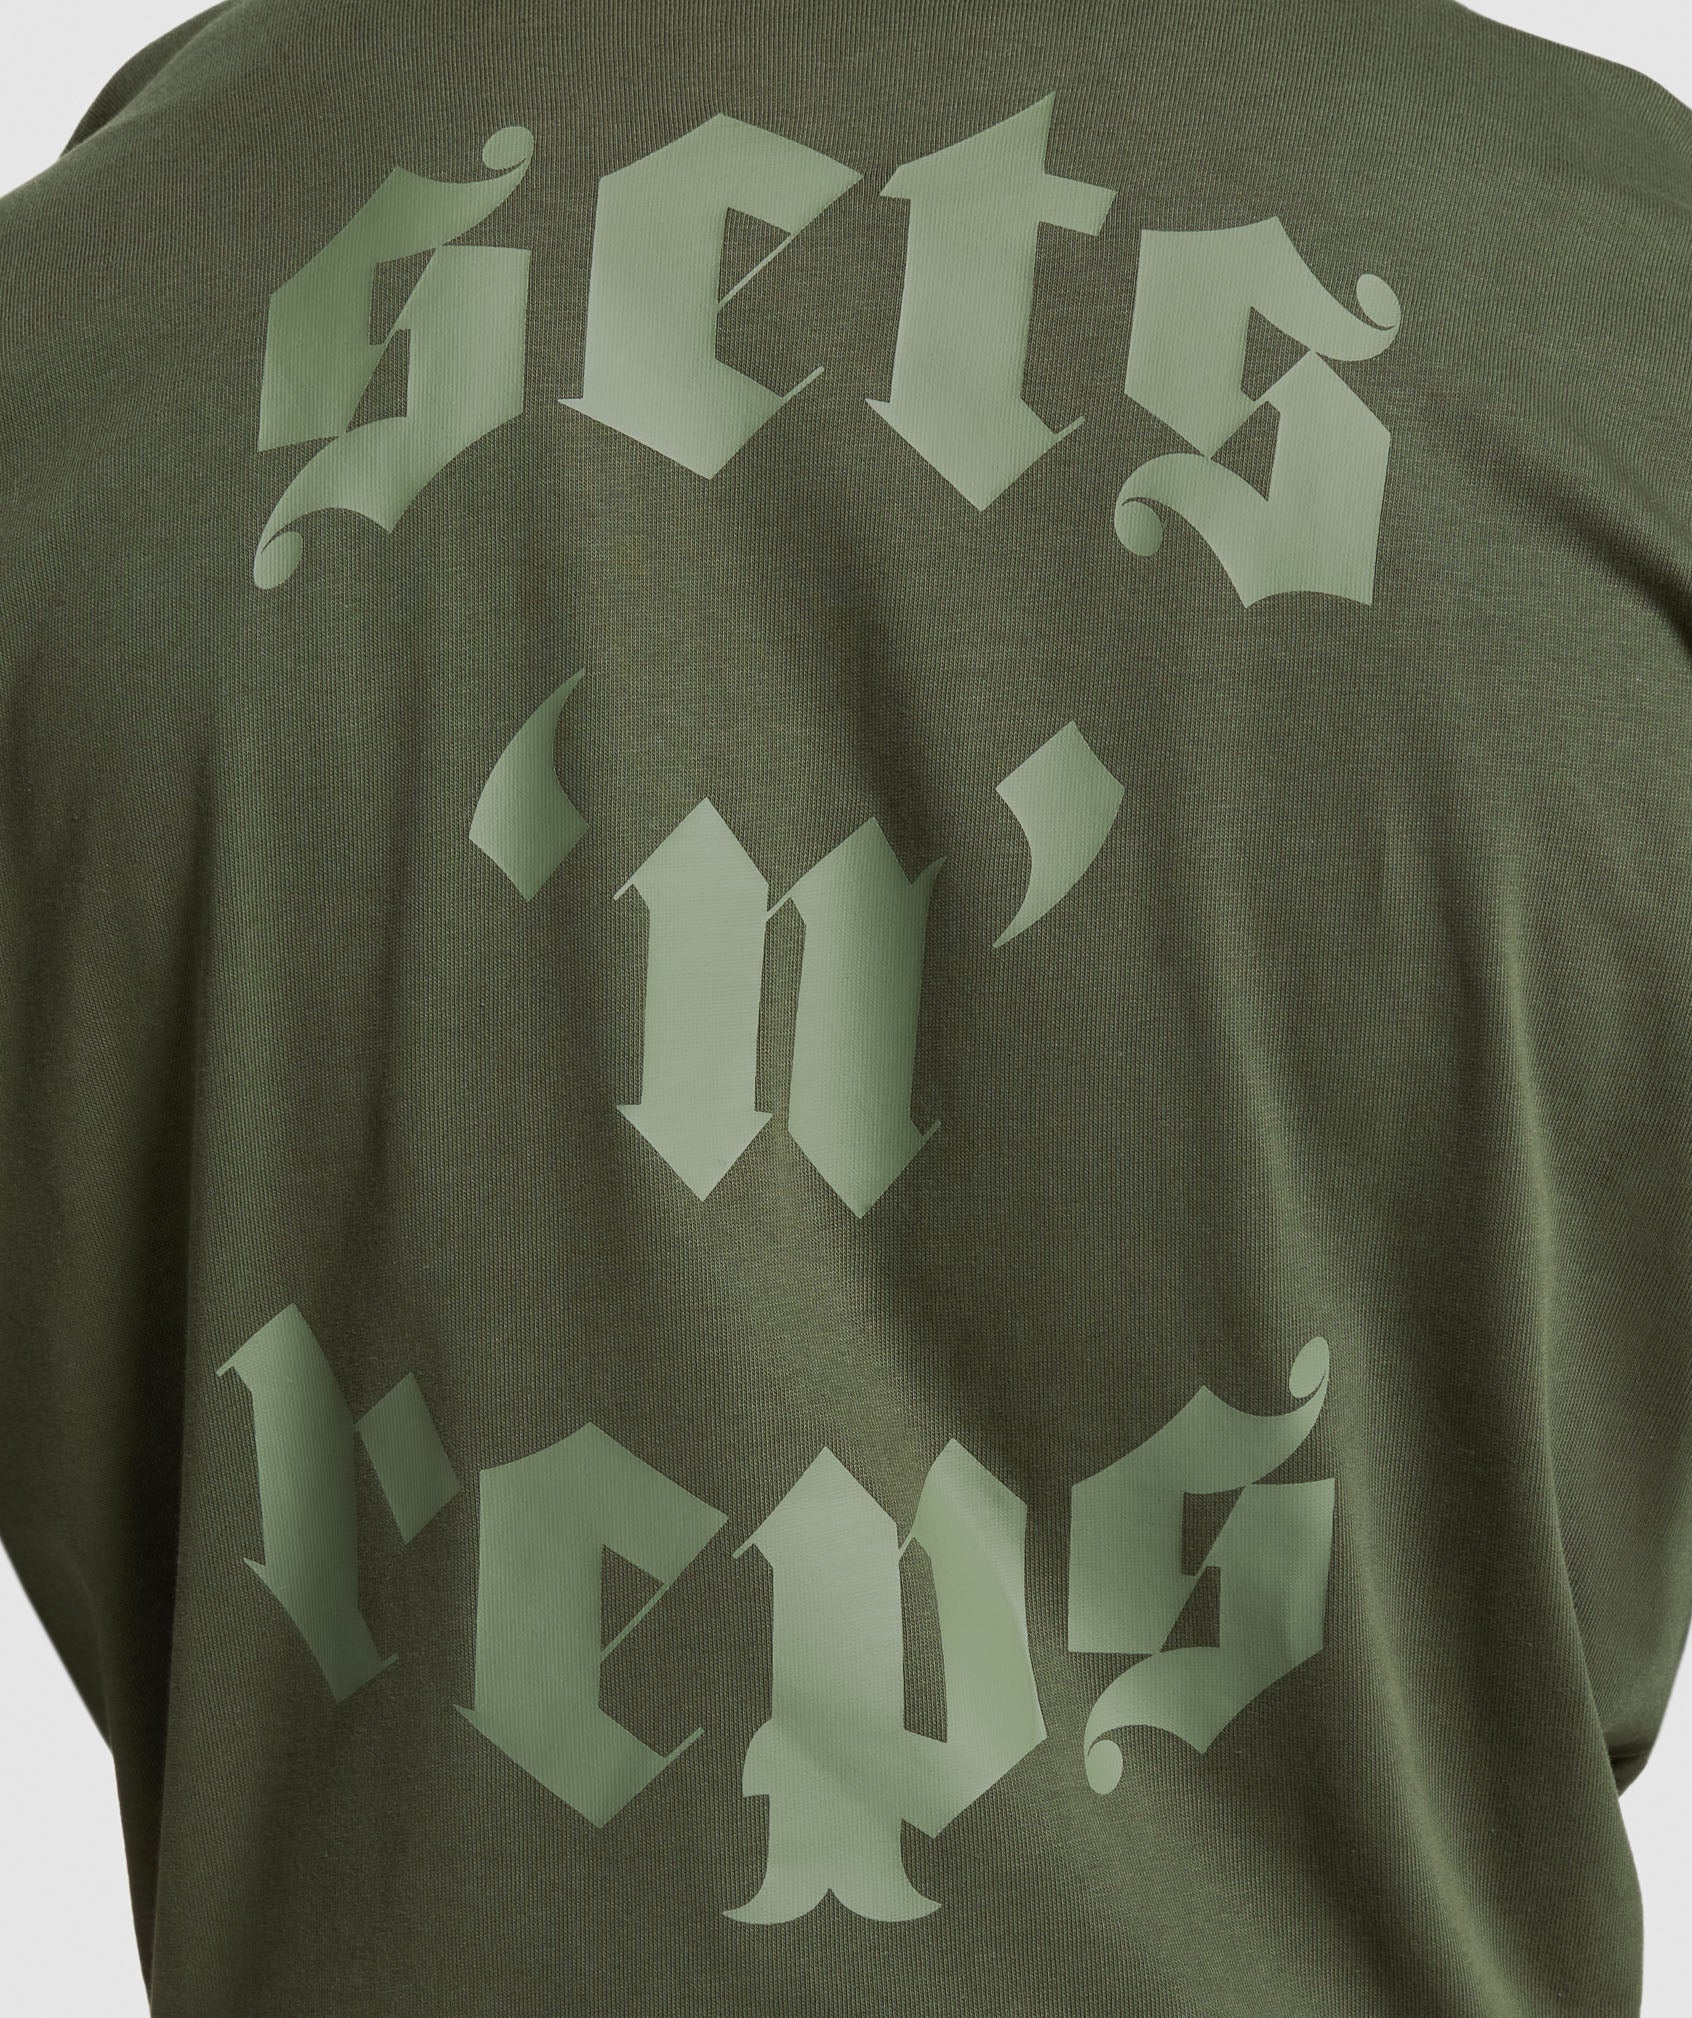 Sets N Reps T-Shirt in Winter Olive - view 5